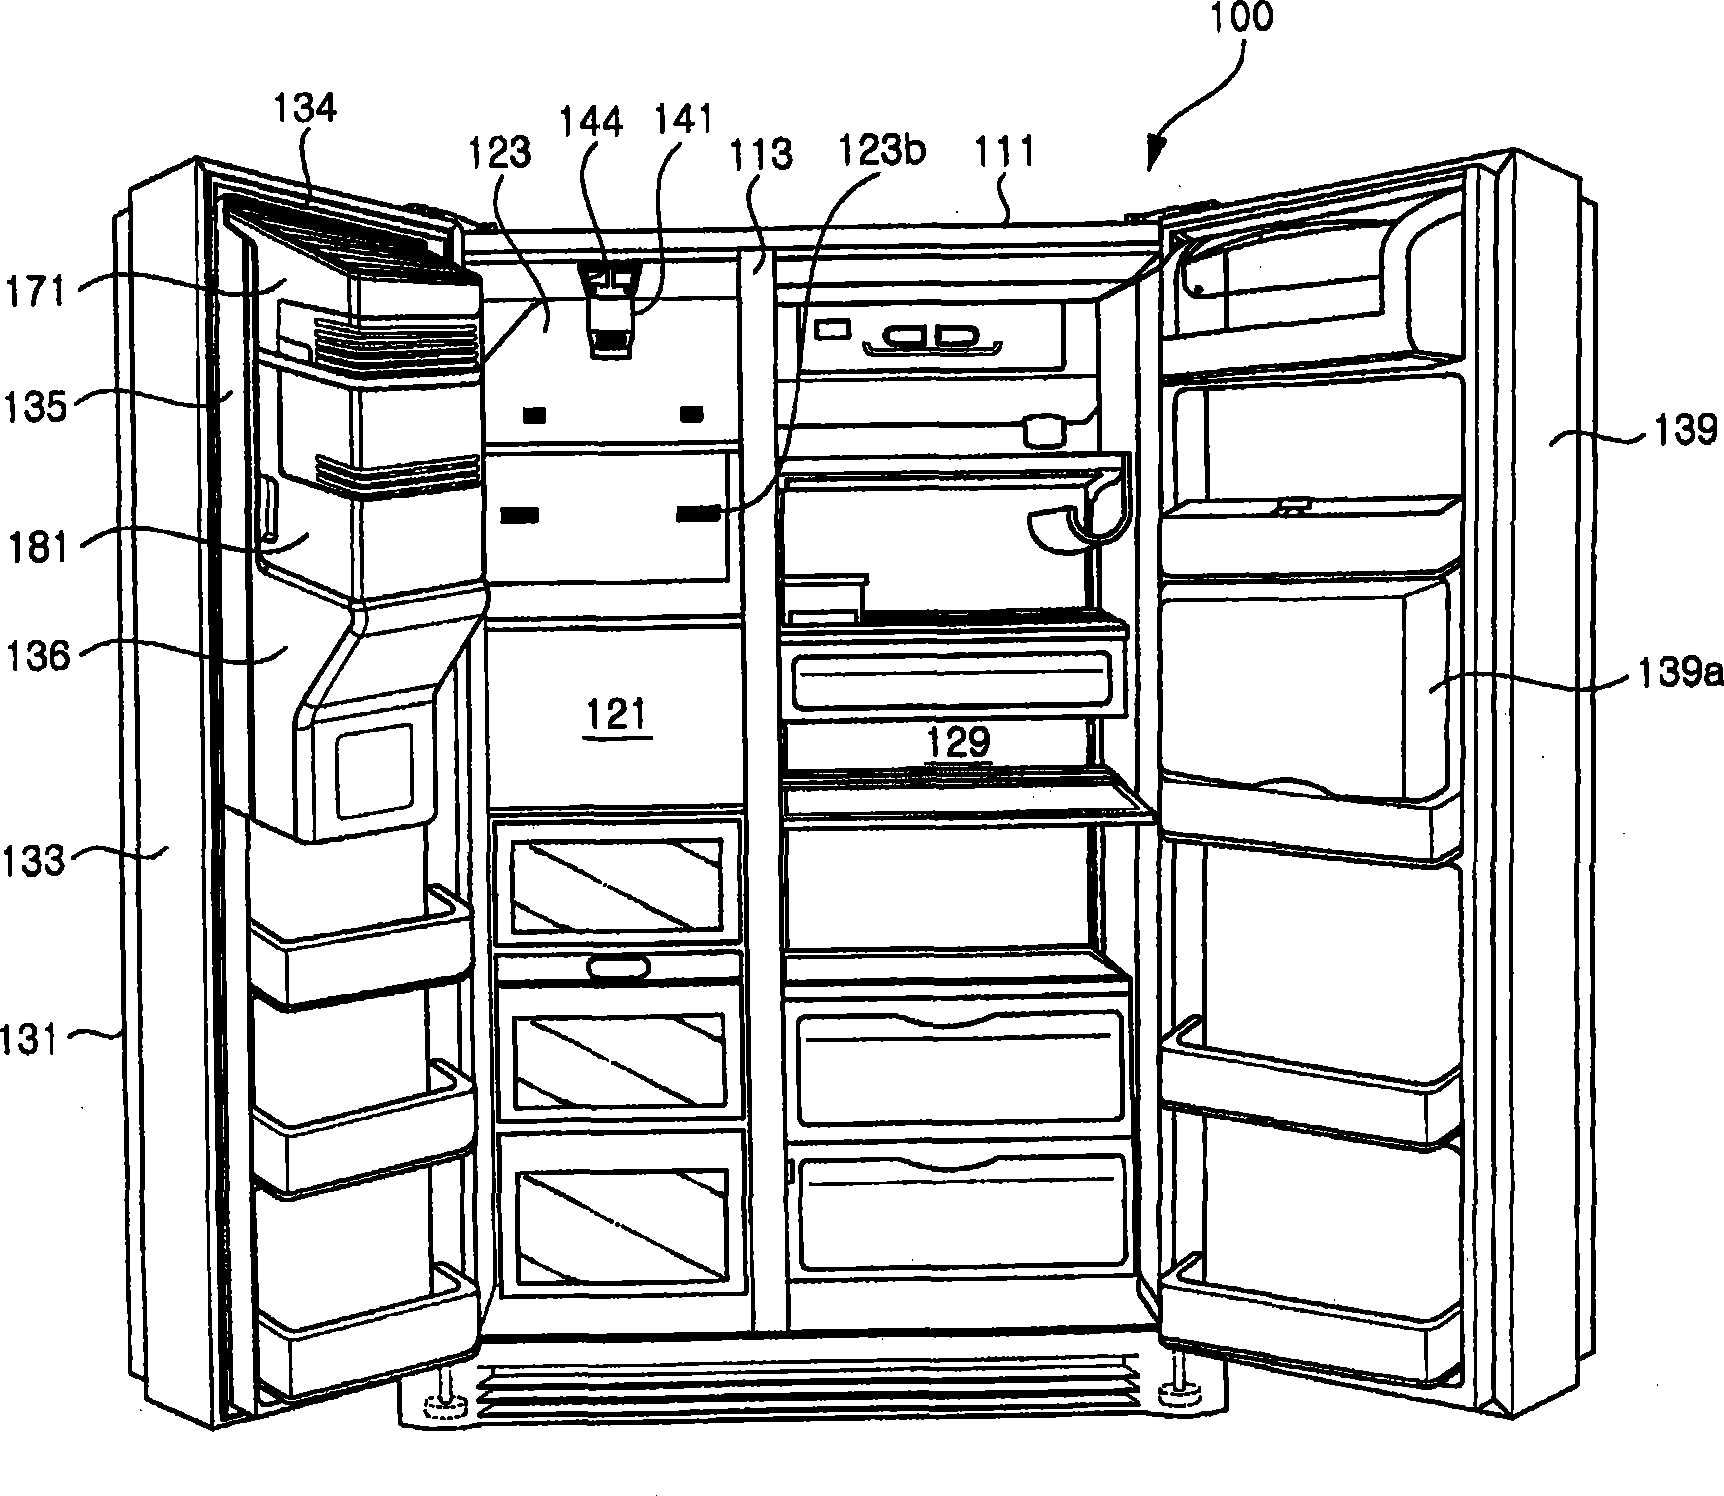 Ice-making device for refrigerator